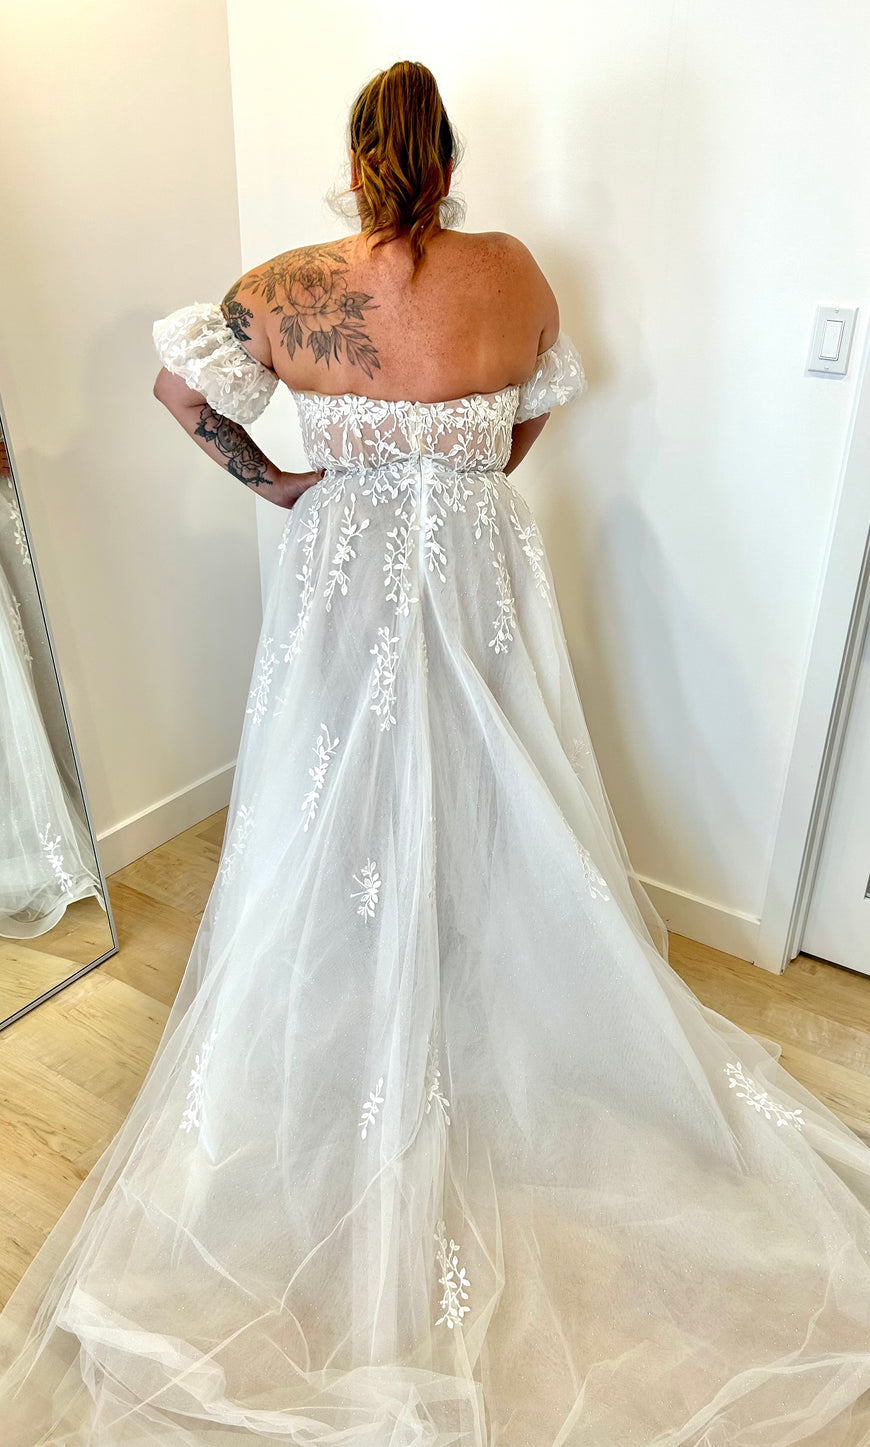 Margarita - long embroidered tulle wedding dress with strapless strapless neckline, embroidered with beaded lace and puff sleeves